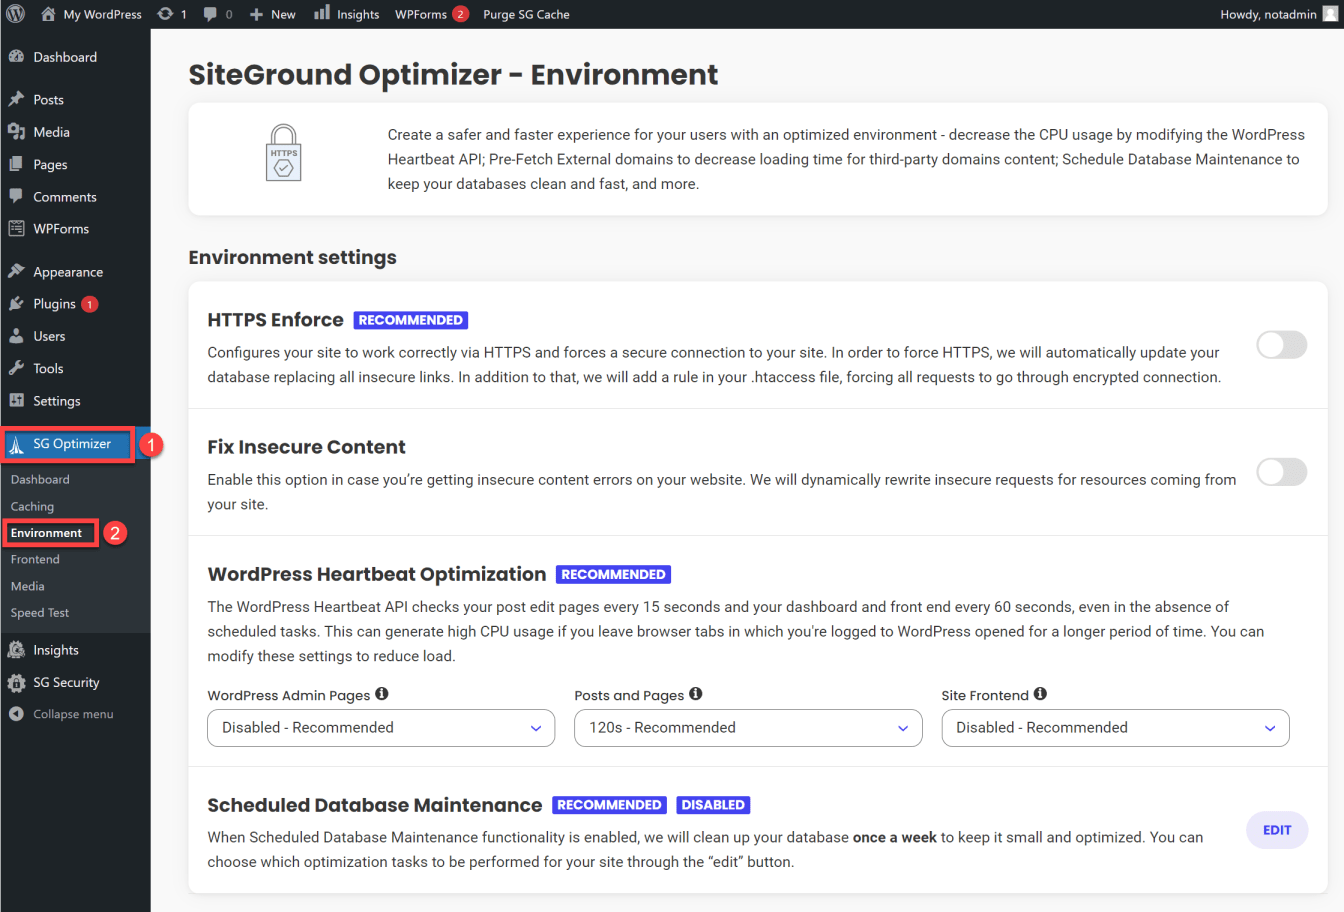 Go to the Environment section of the SG Optimizer plugin.